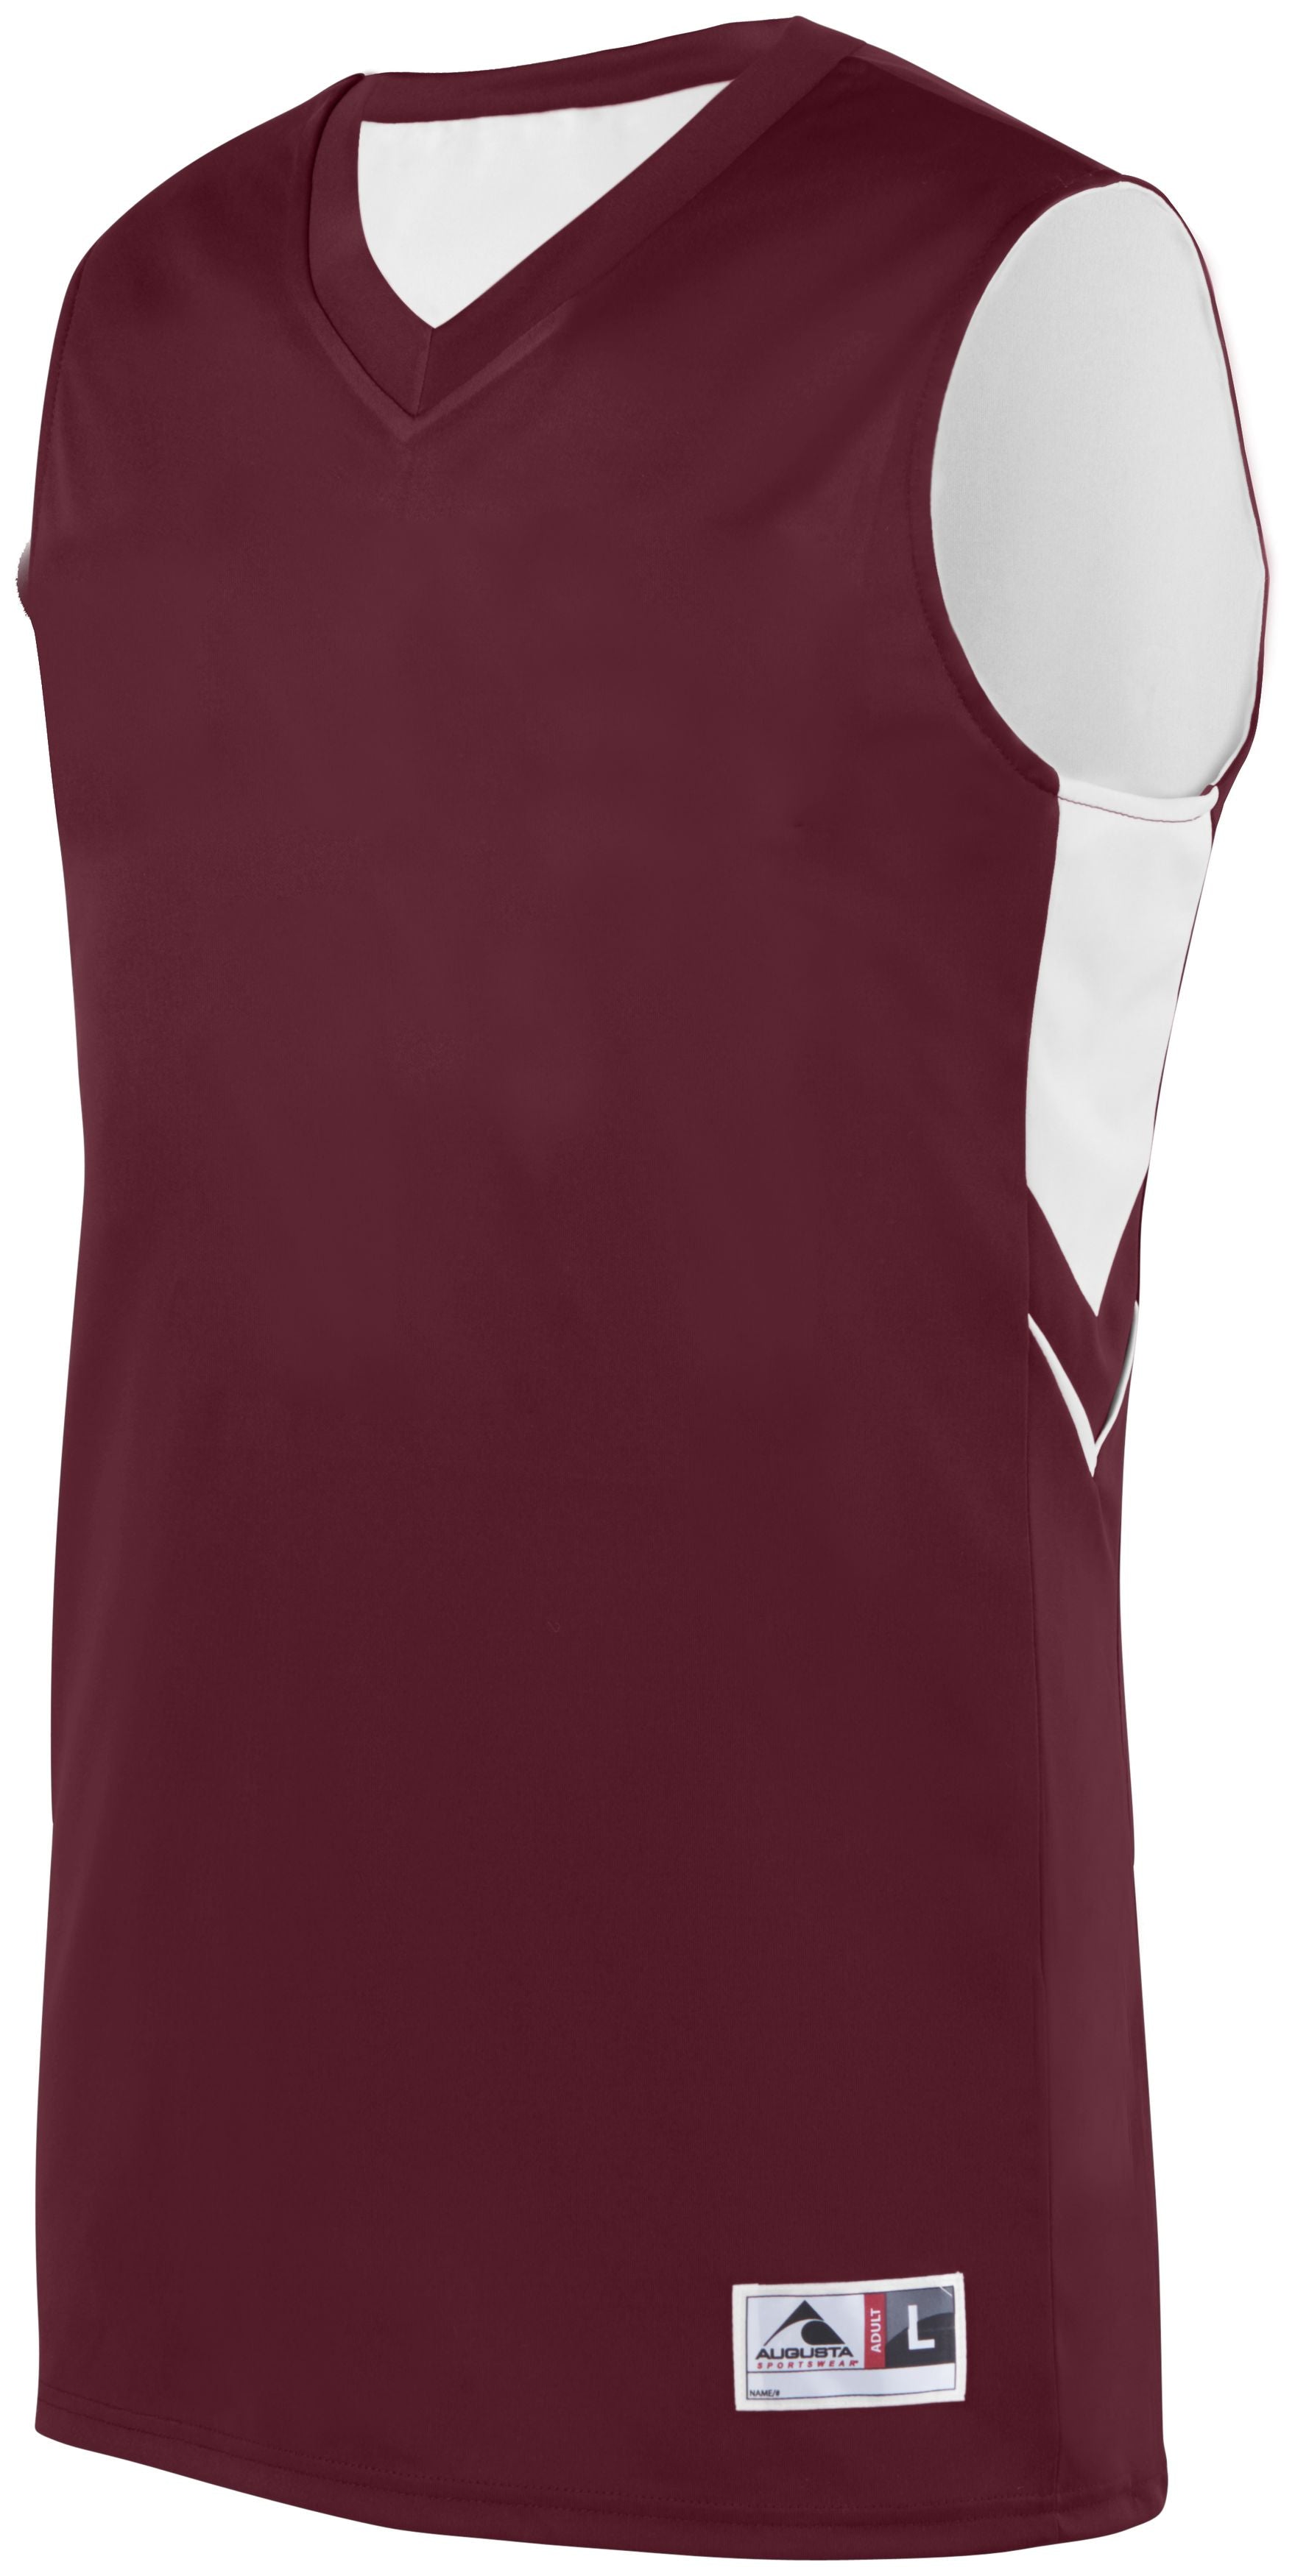 Augusta Sportswear Alley-Oop Reversible Jersey in Maroon/White  -Part of the Adult, Adult-Jersey, Augusta-Products, Basketball, Shirts, All-Sports, All-Sports-1 product lines at KanaleyCreations.com